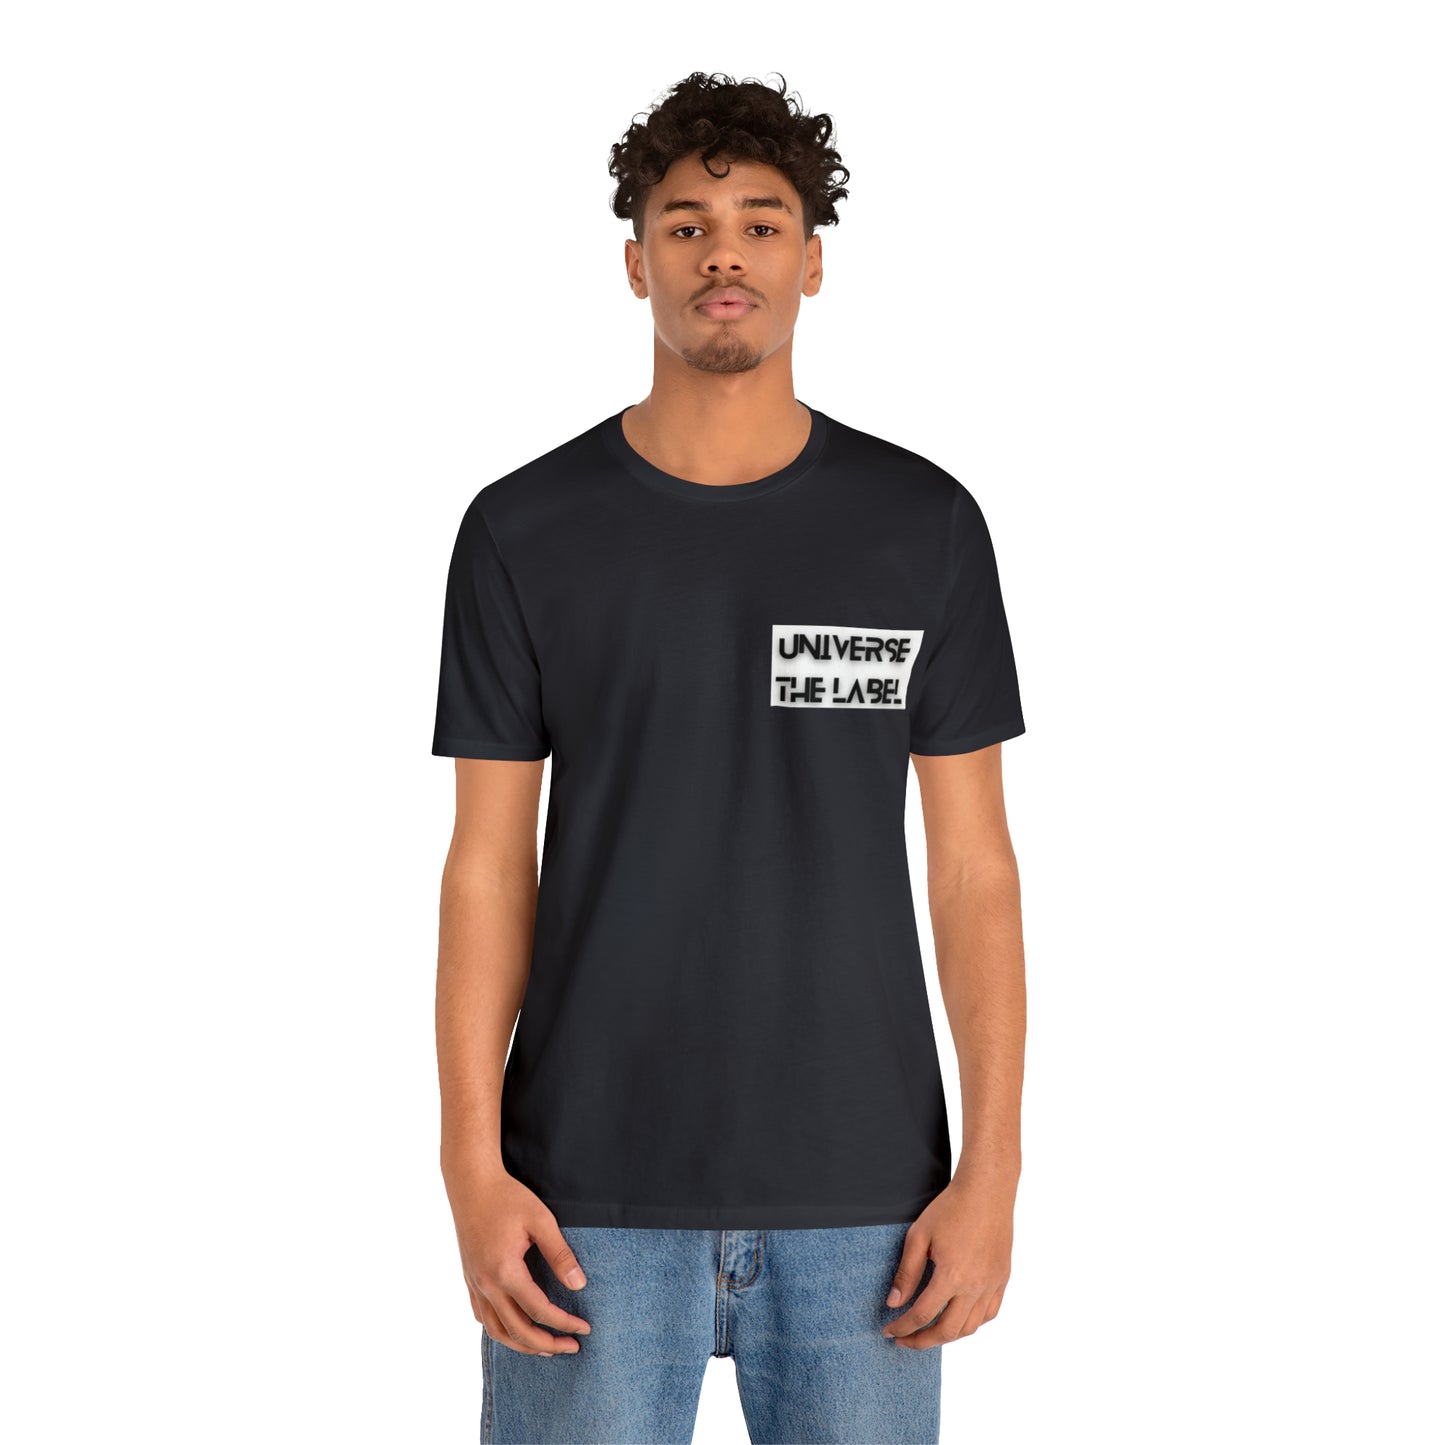 Universe The Label Short Sleeve Tee